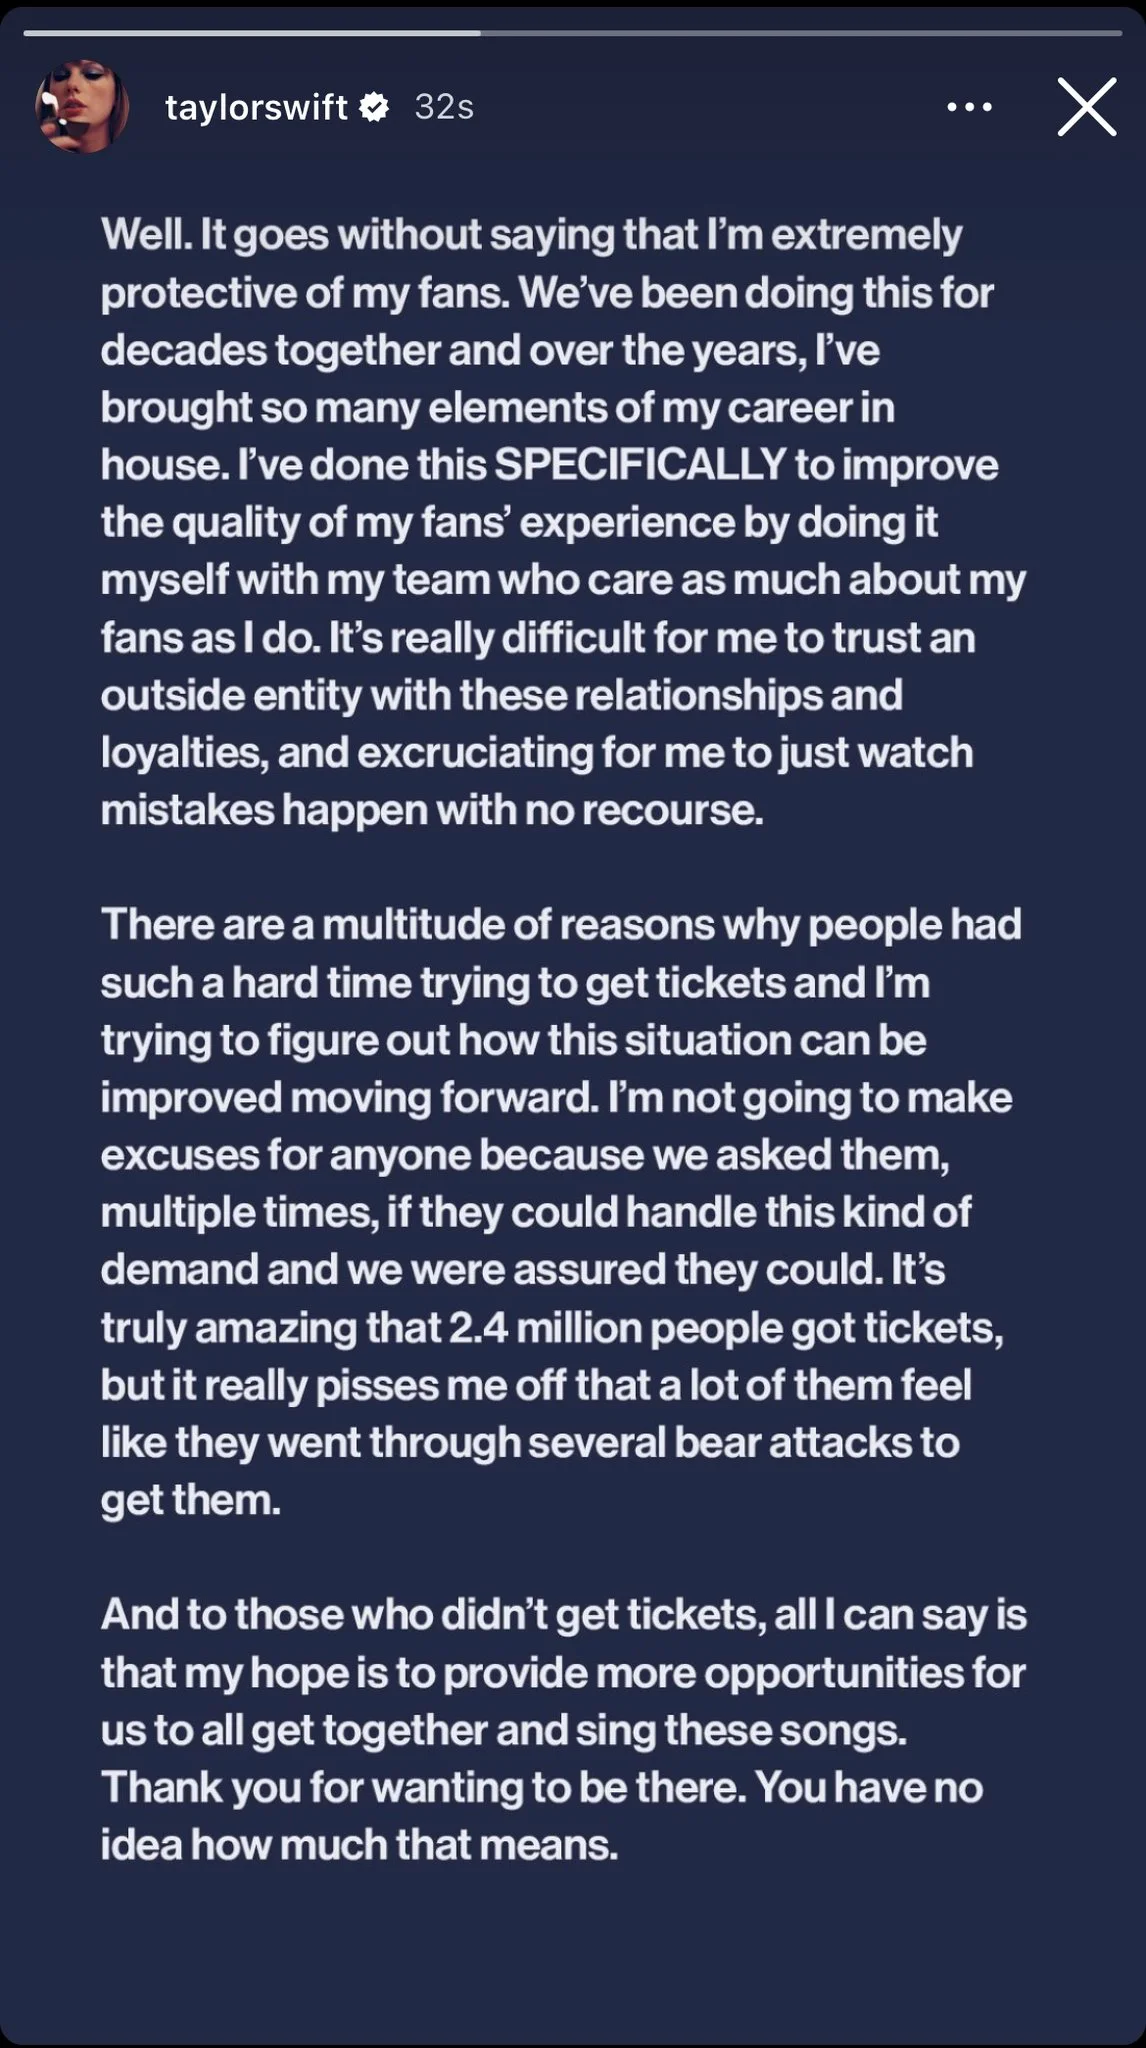 Taylor Swift's response to ticketmaster